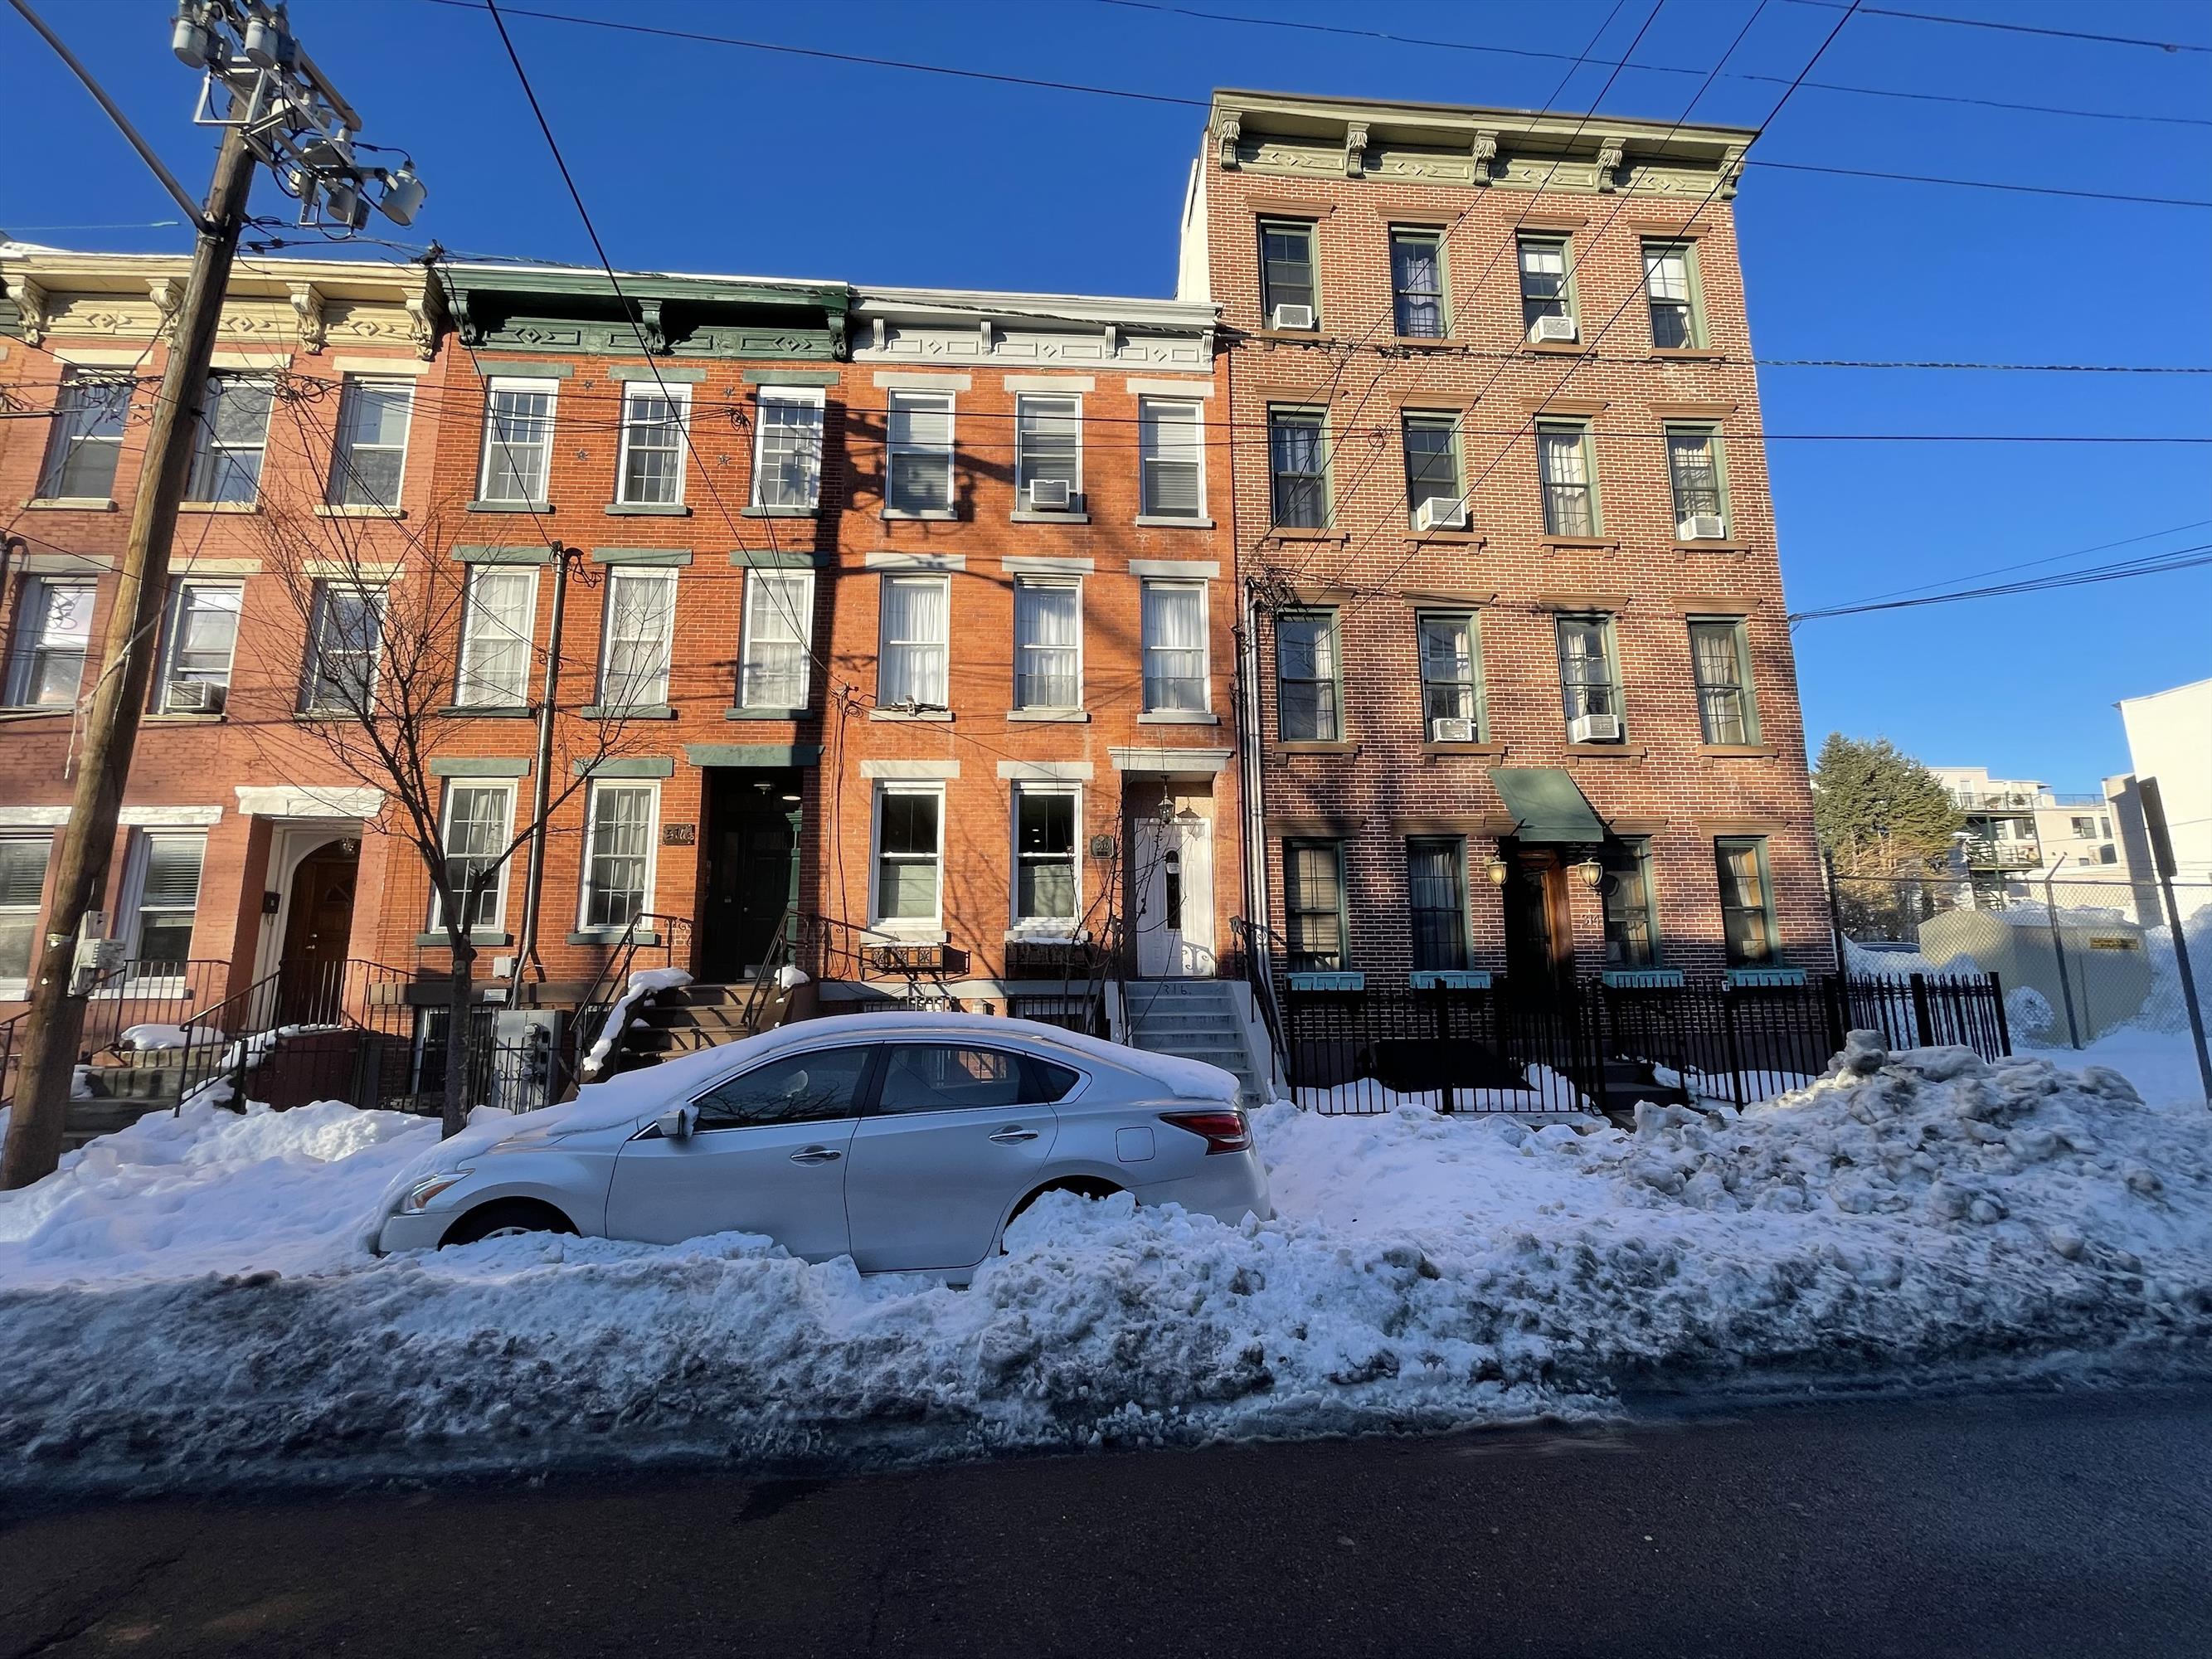 Beautiful updated 1 bedroom; featuring exposed brick and hardwood floors.
Kitchen has a breakfast counter.
Near Public Transportation.
In Downtown Jersey City. Parking is good due to lack of residences across the street, and just a quick walk to either Newport or Grove st..
Tenant Pays all Utilities except for water. Utilities run usually under 100/month.
1/2 Month Brokers fee.